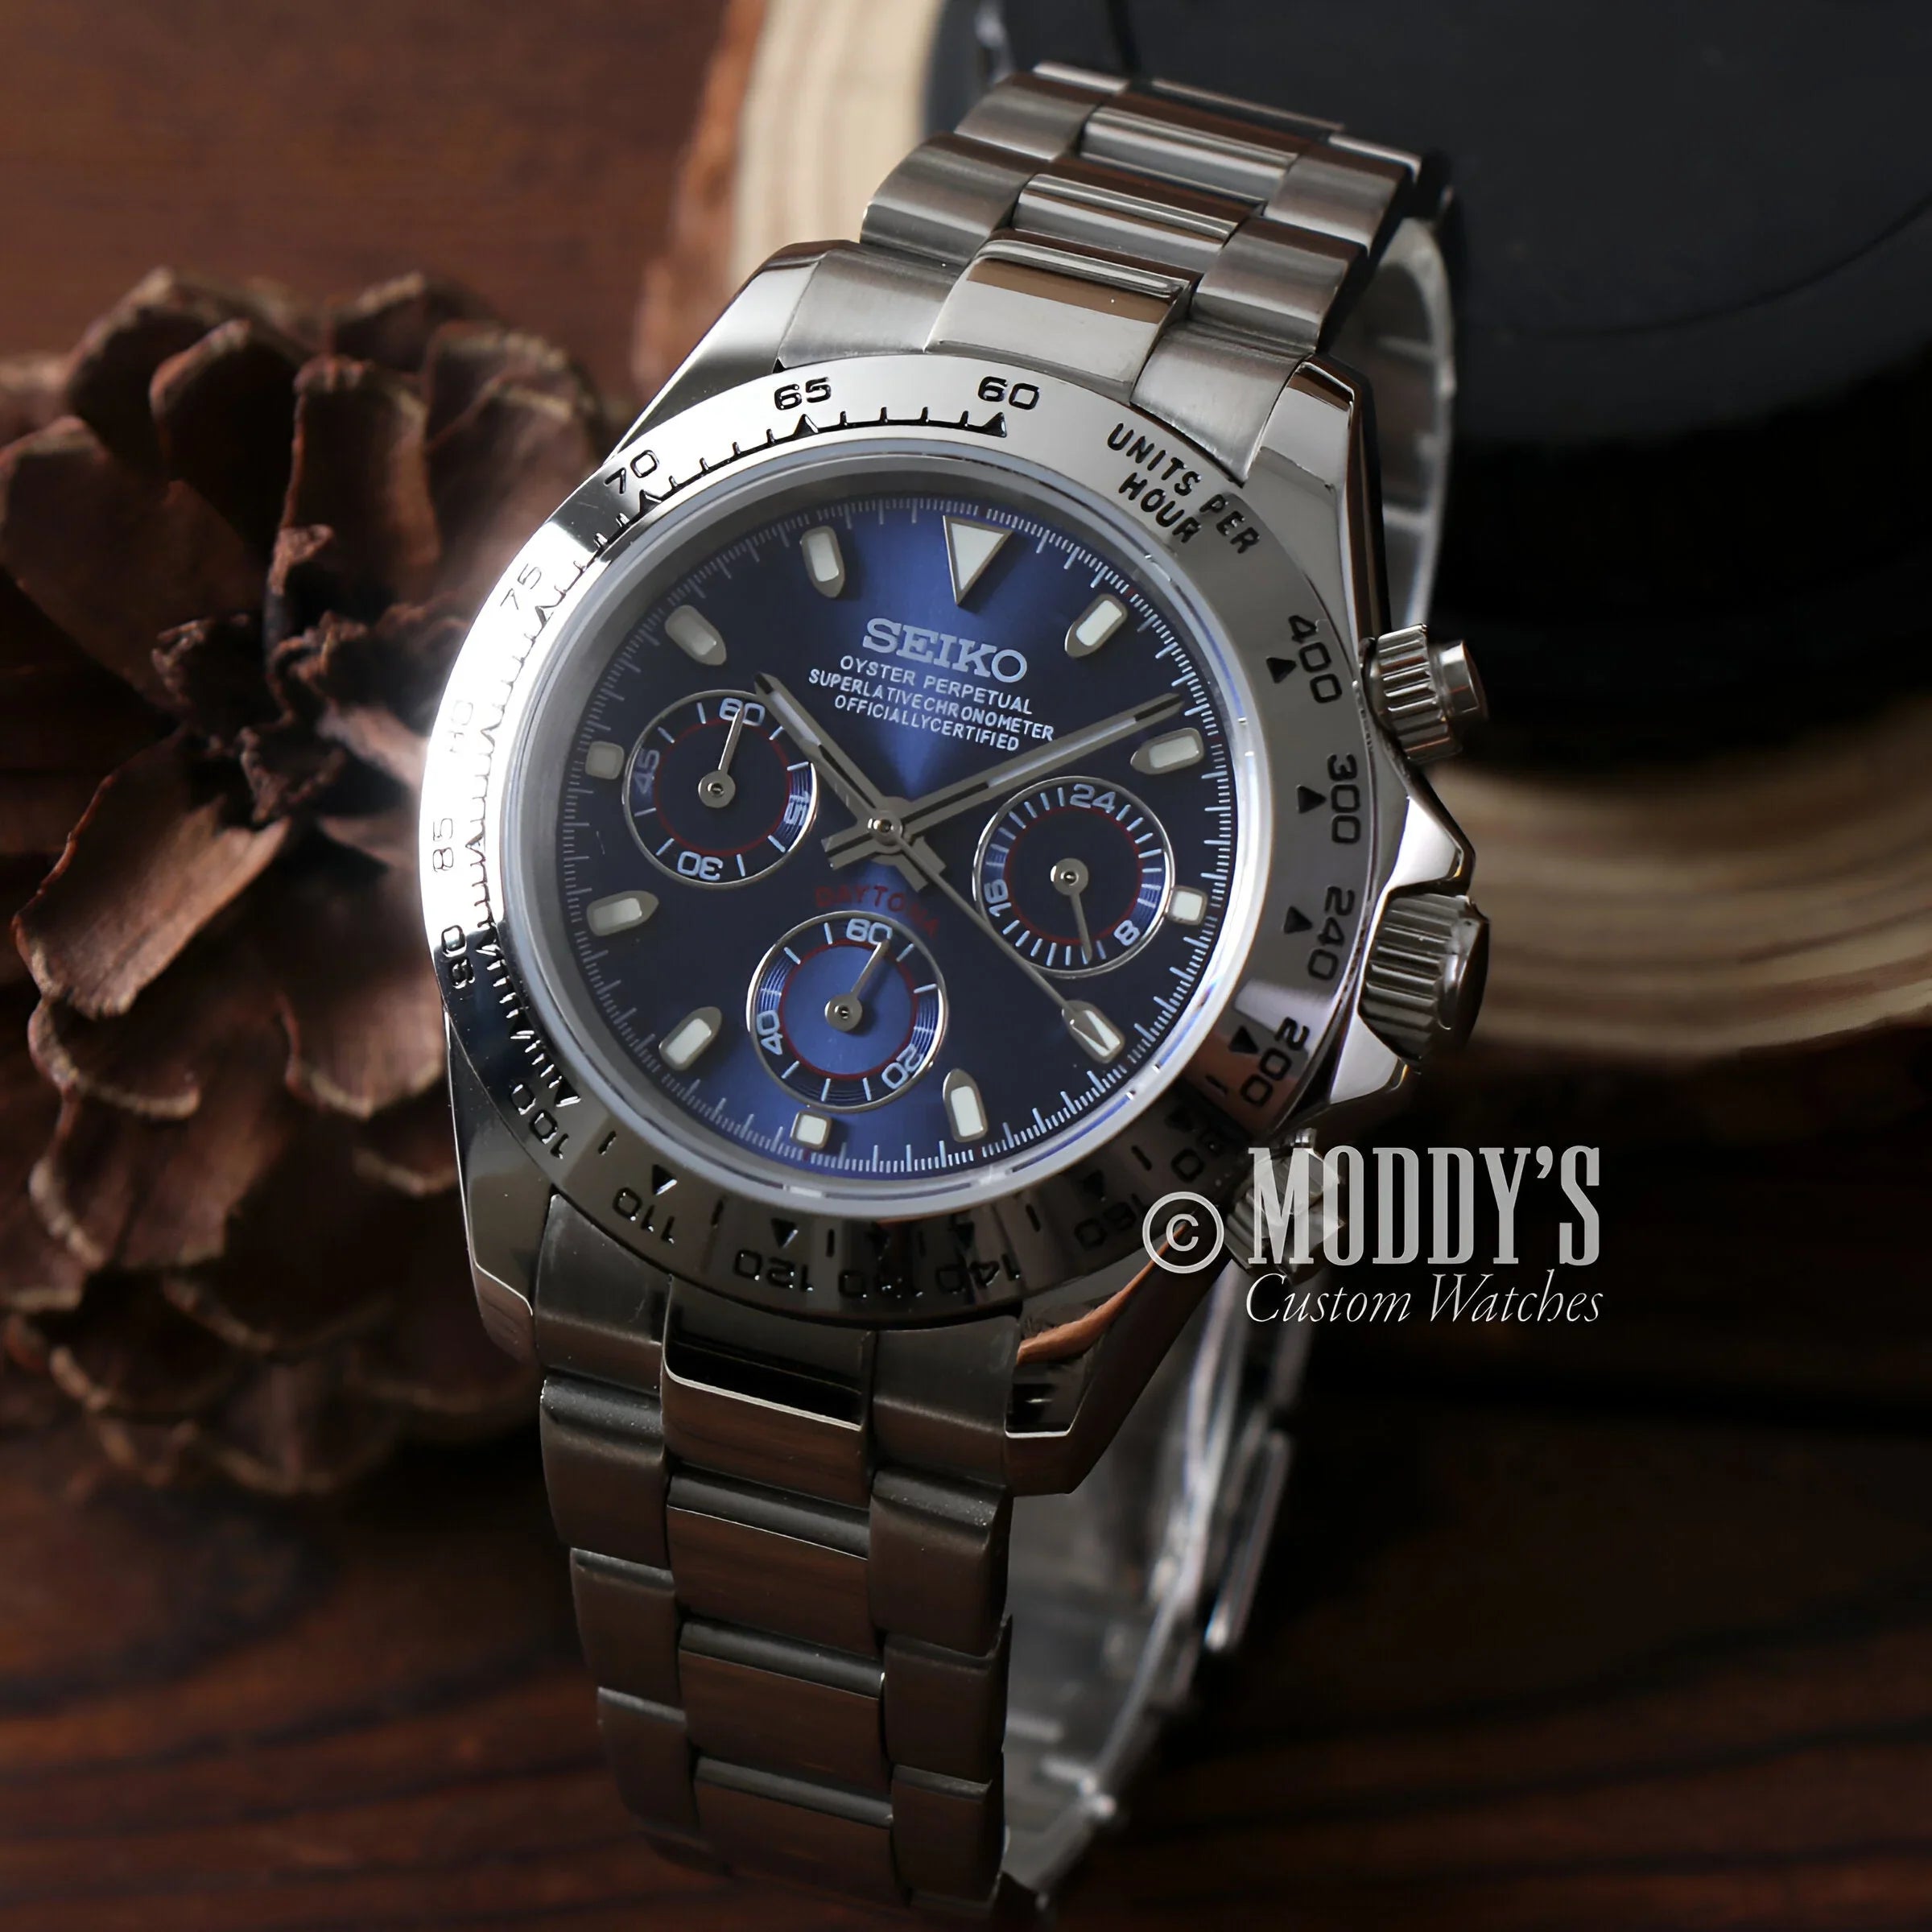 Seitona Silver - Blue Watch, Blue Dial On Wooden Table, Vk63 Hybrid Movement